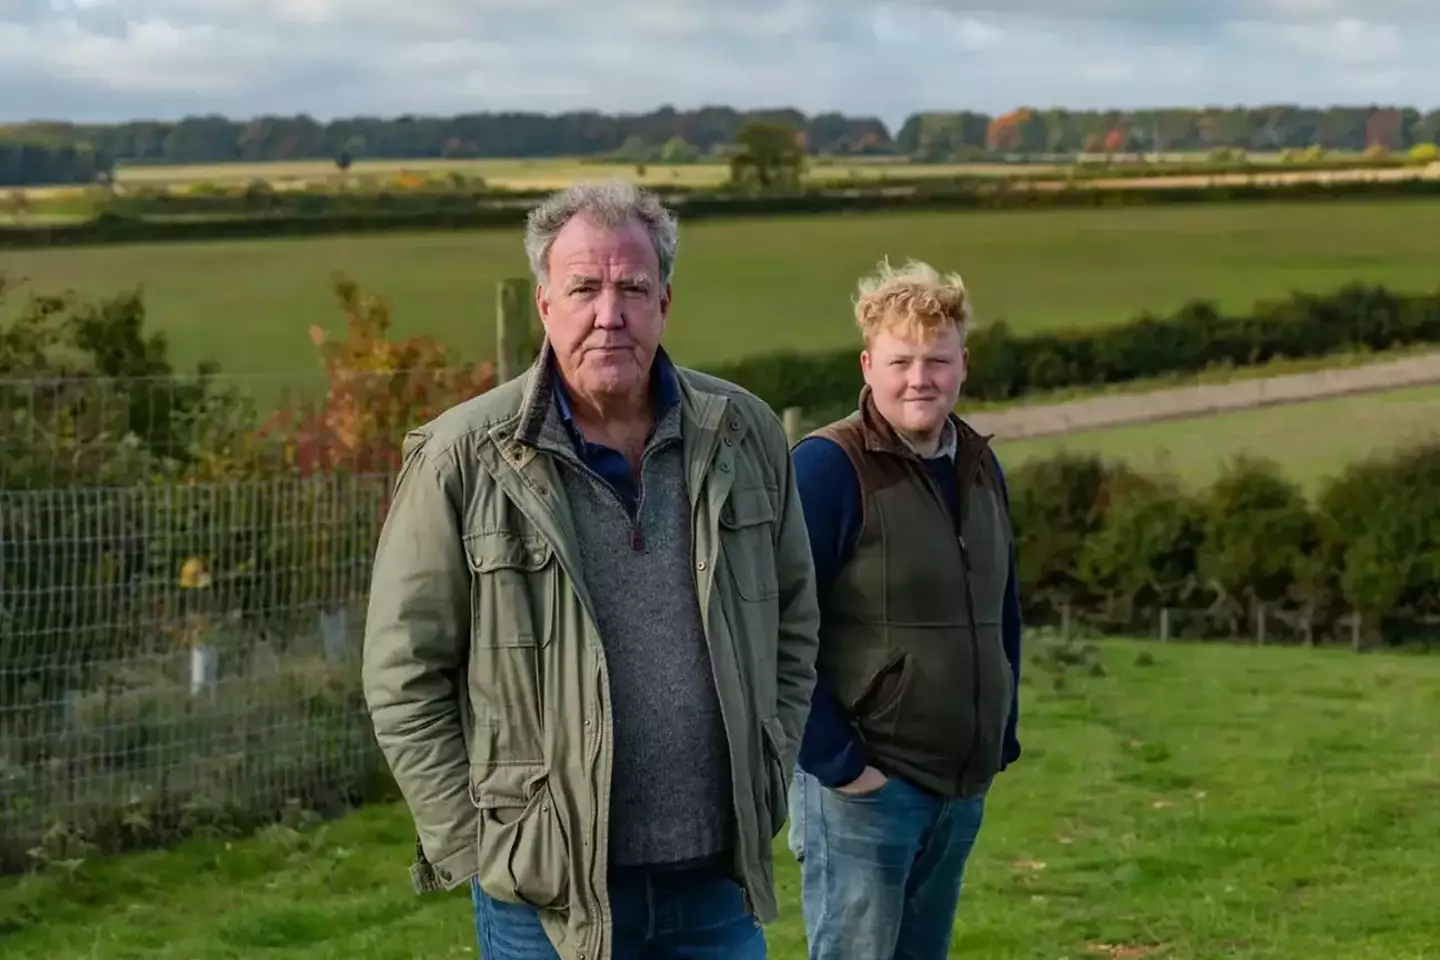 The hugely popular series follows Clarkson's farming endeavours.